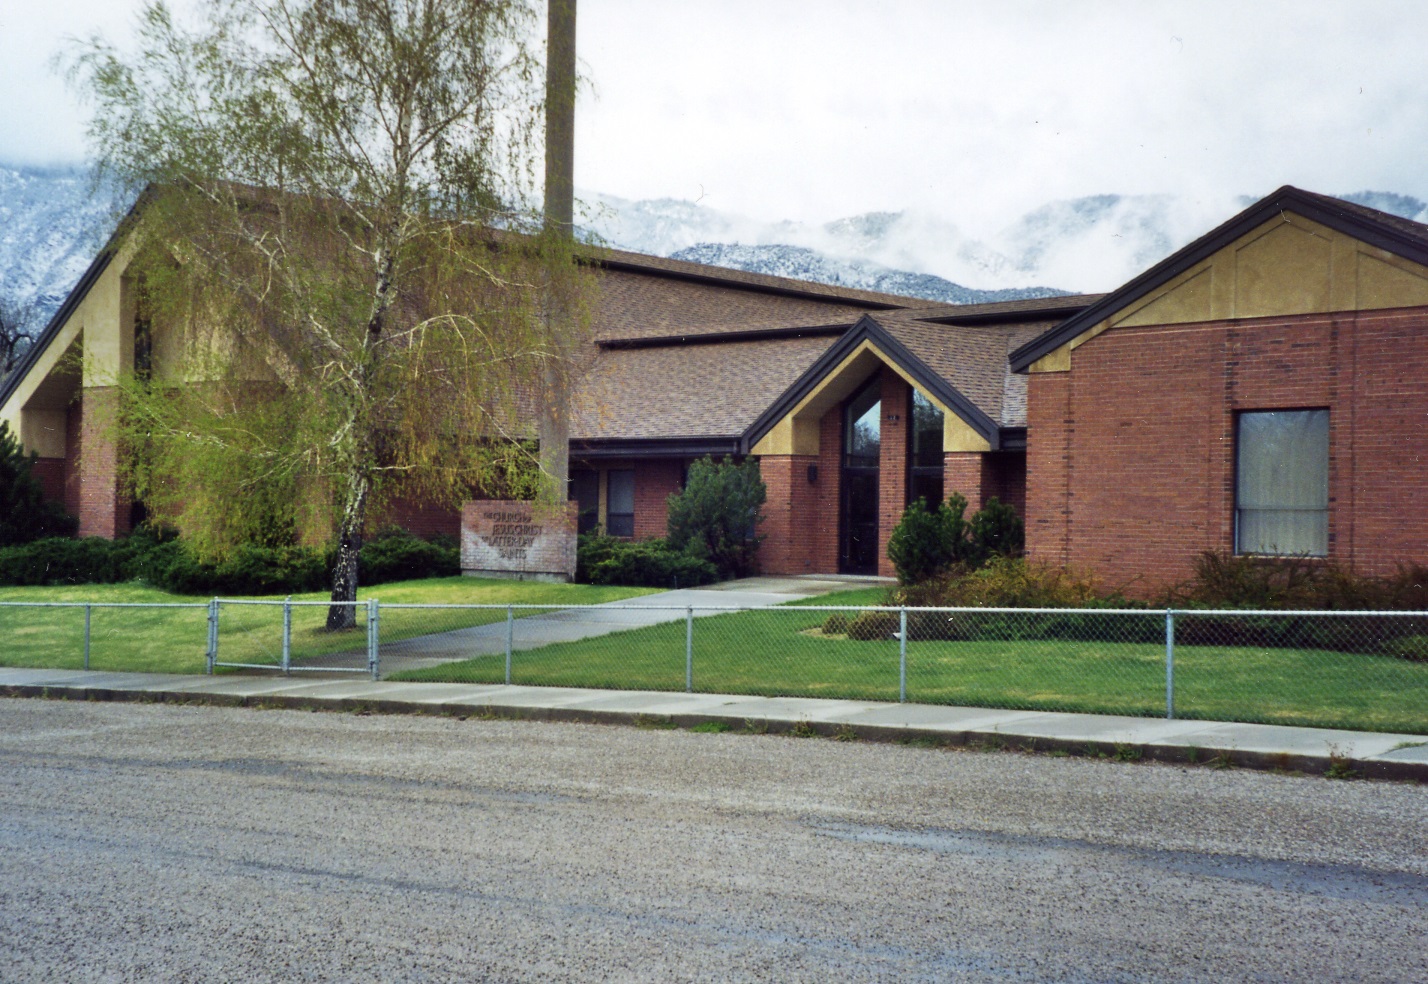 The New Harmony church building after it was remodeled in 1996